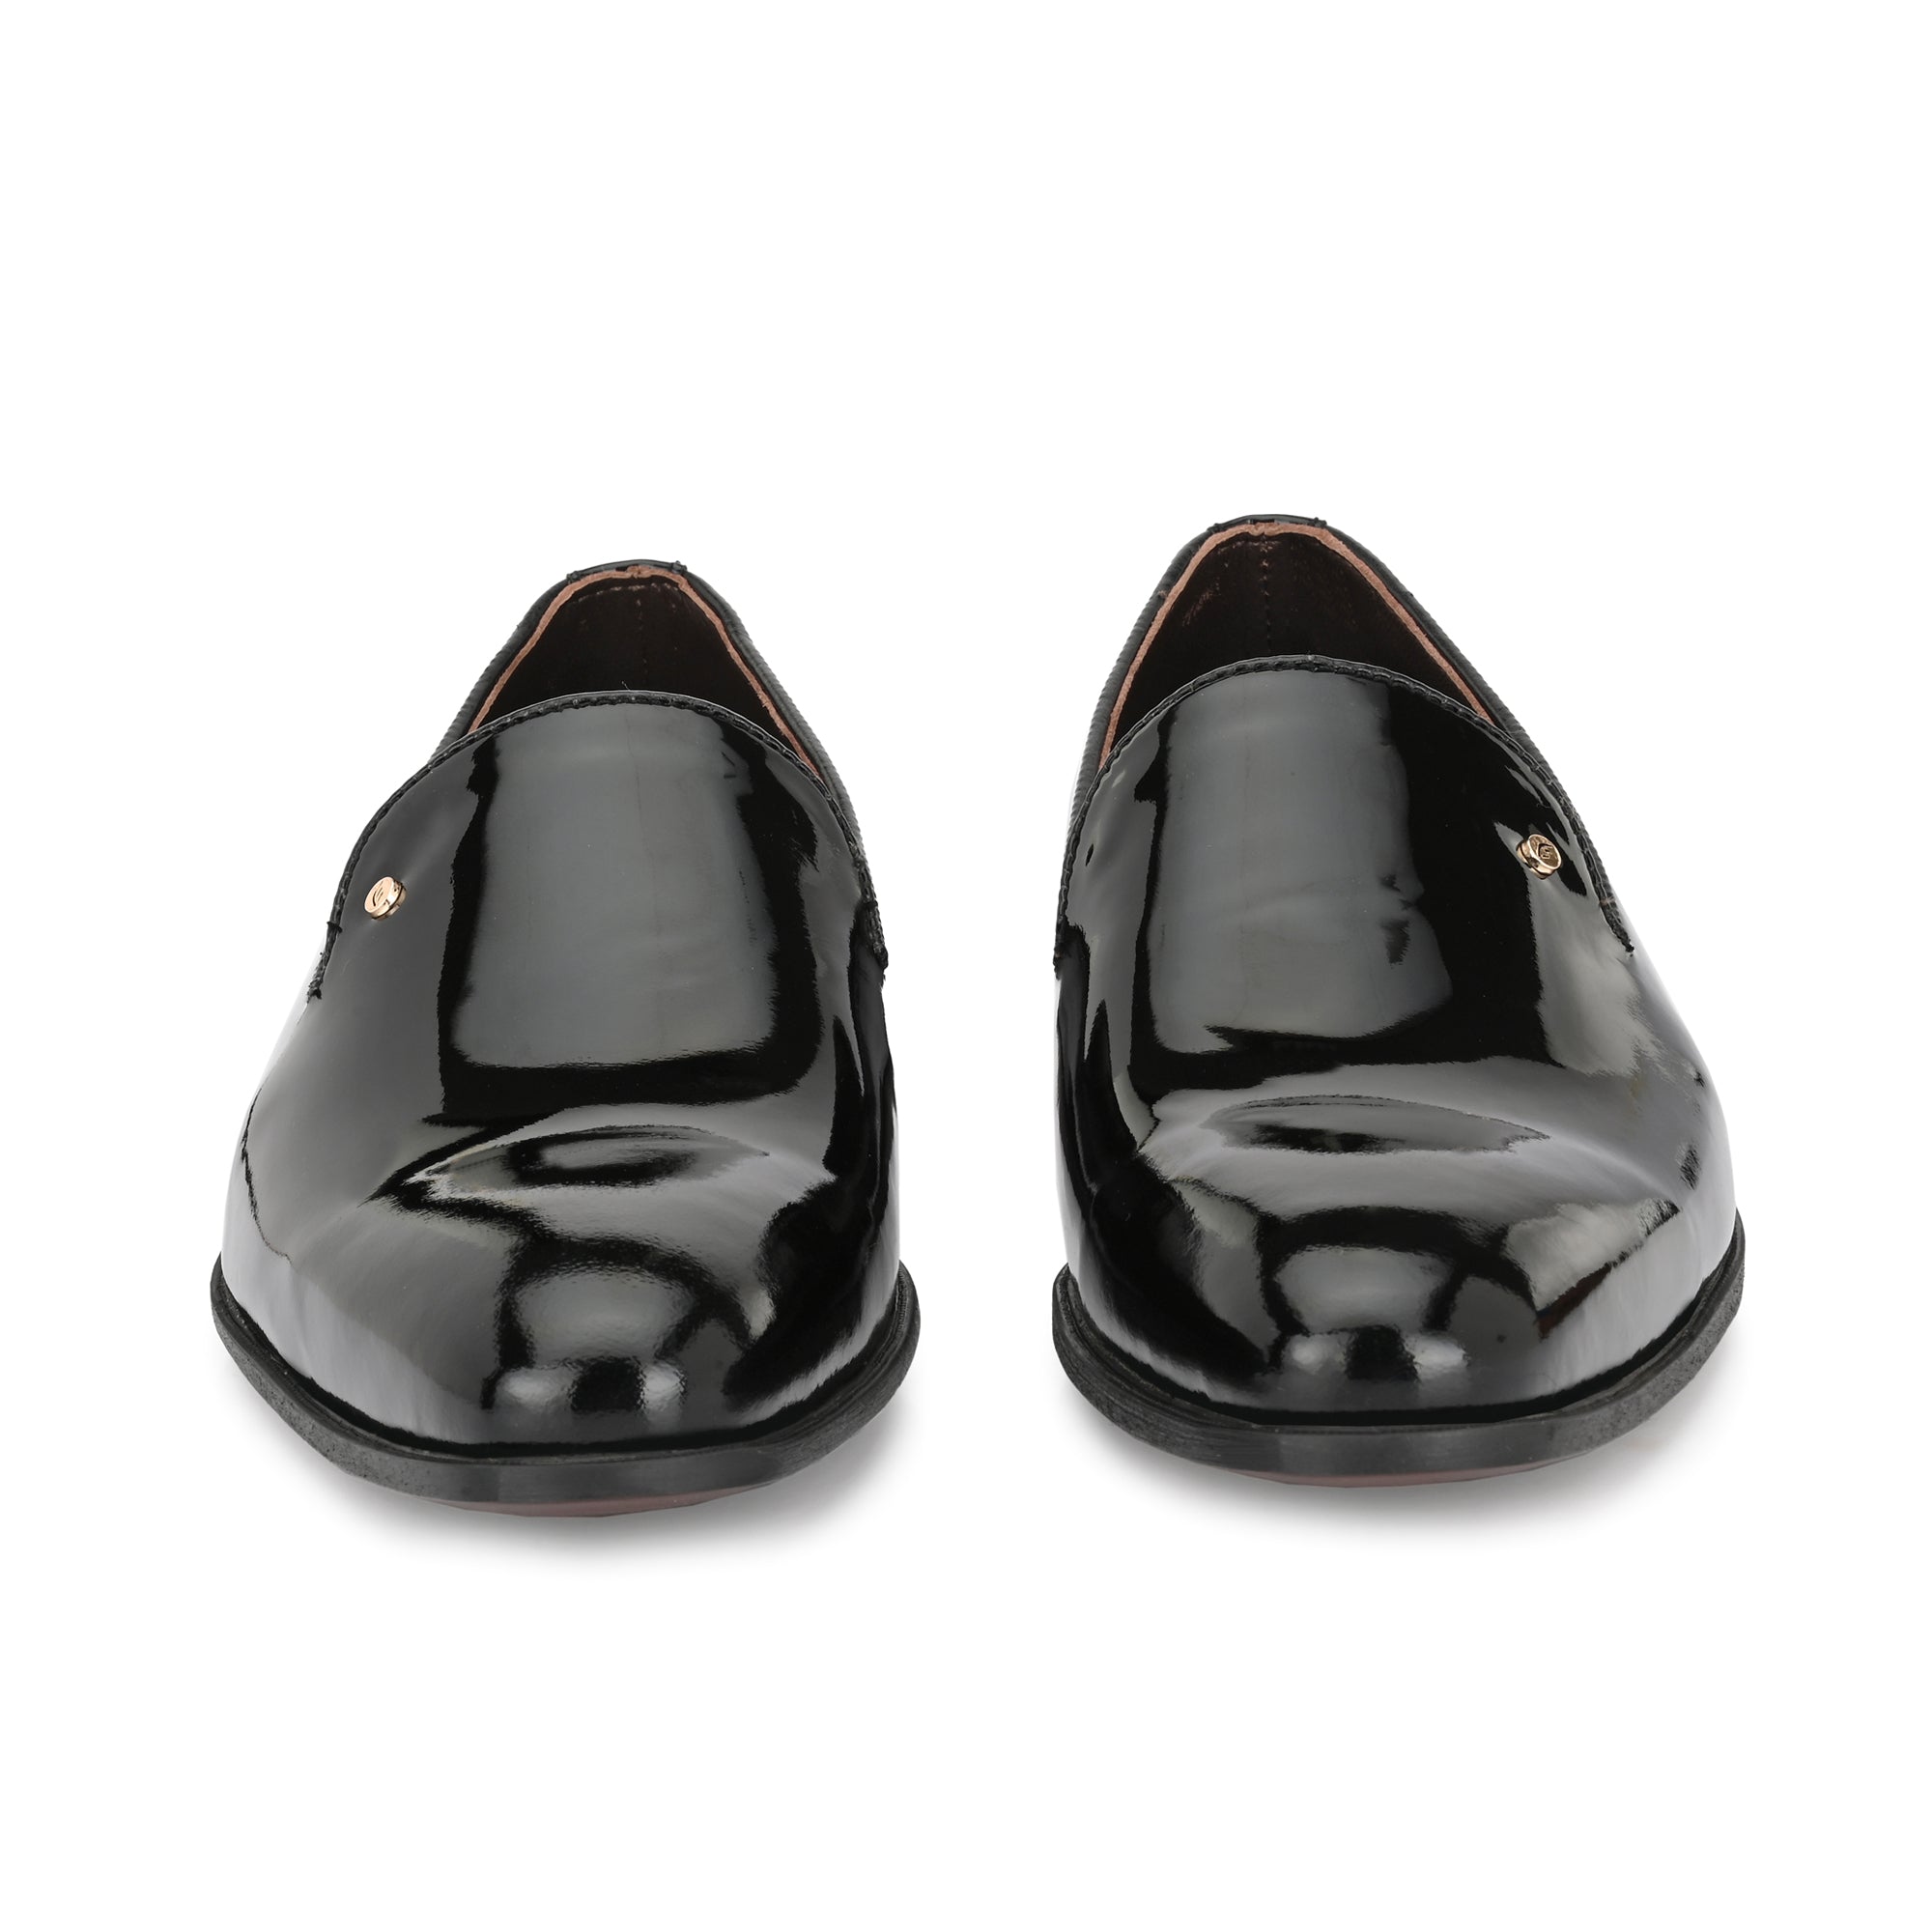 Penny Loafers For Men by Egoss